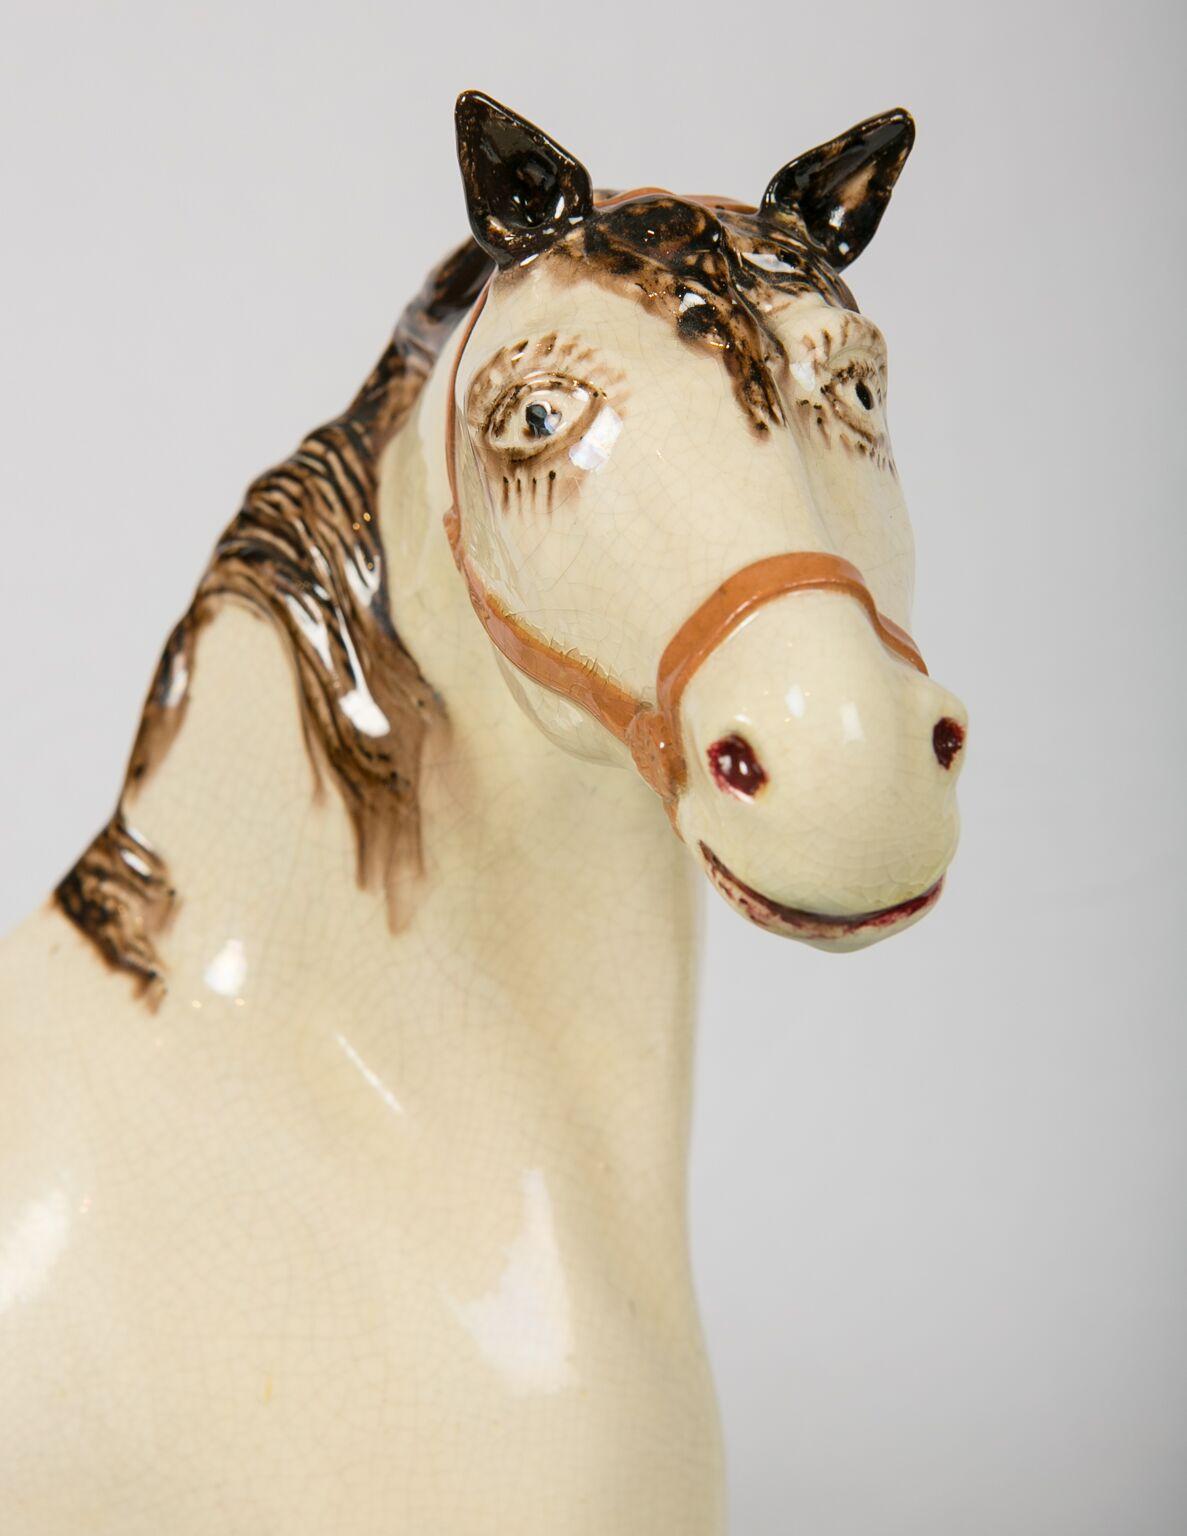  I have always wanted one of these. I'm thrilled to have found it.
This Leeds Pottery stallion has a wonderful face with beautiful eyes. 
Large creamware enamel-painted horses are rare. Leeds made the largest of the creamware horses. Our horse is